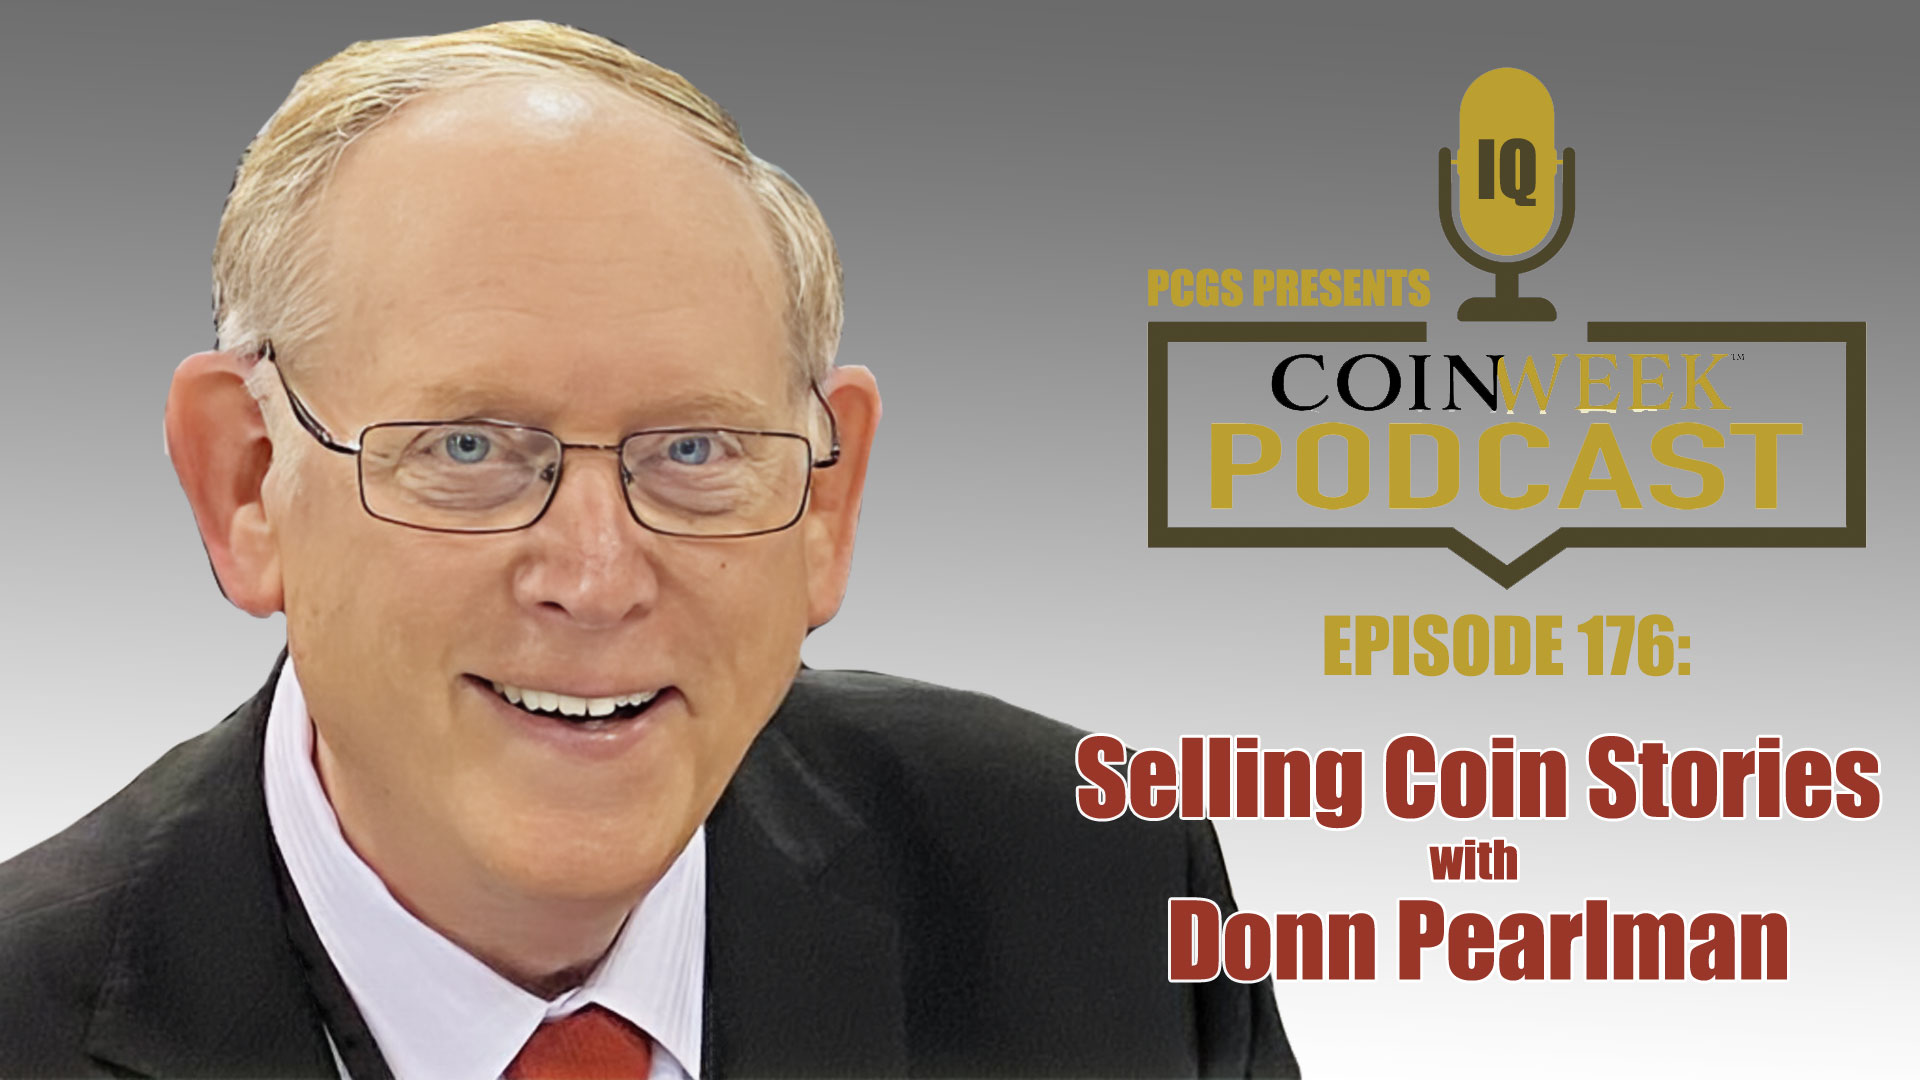 CoinWeek Podcast #176: Selling Coin Stories with Donn Pearlman